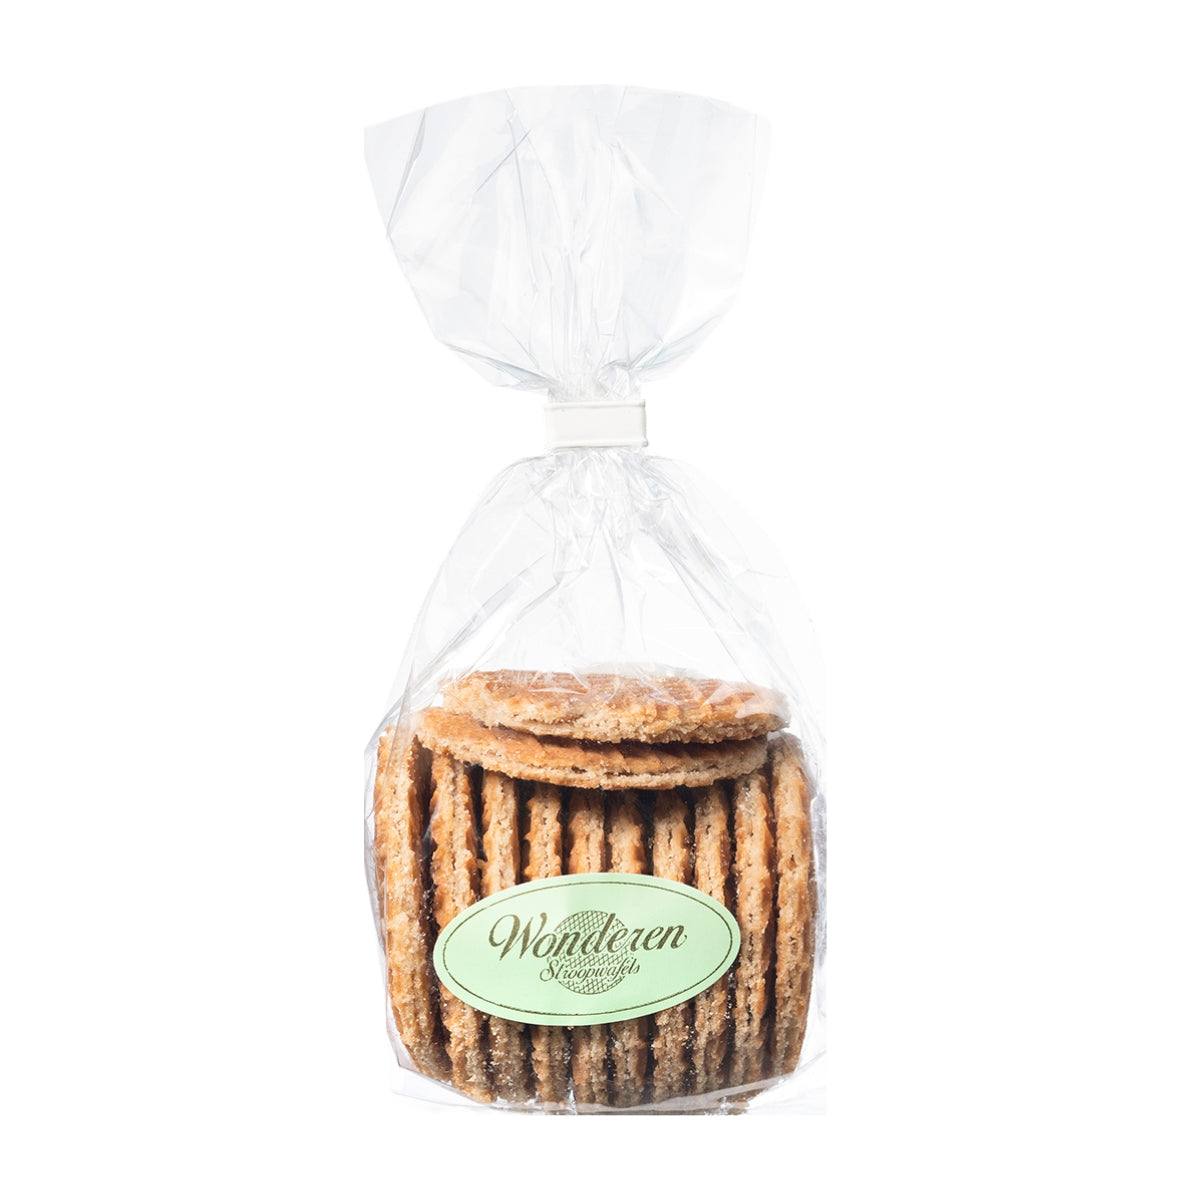 A bag of delicious mini Wonderen Stroopwafels with a label on it.